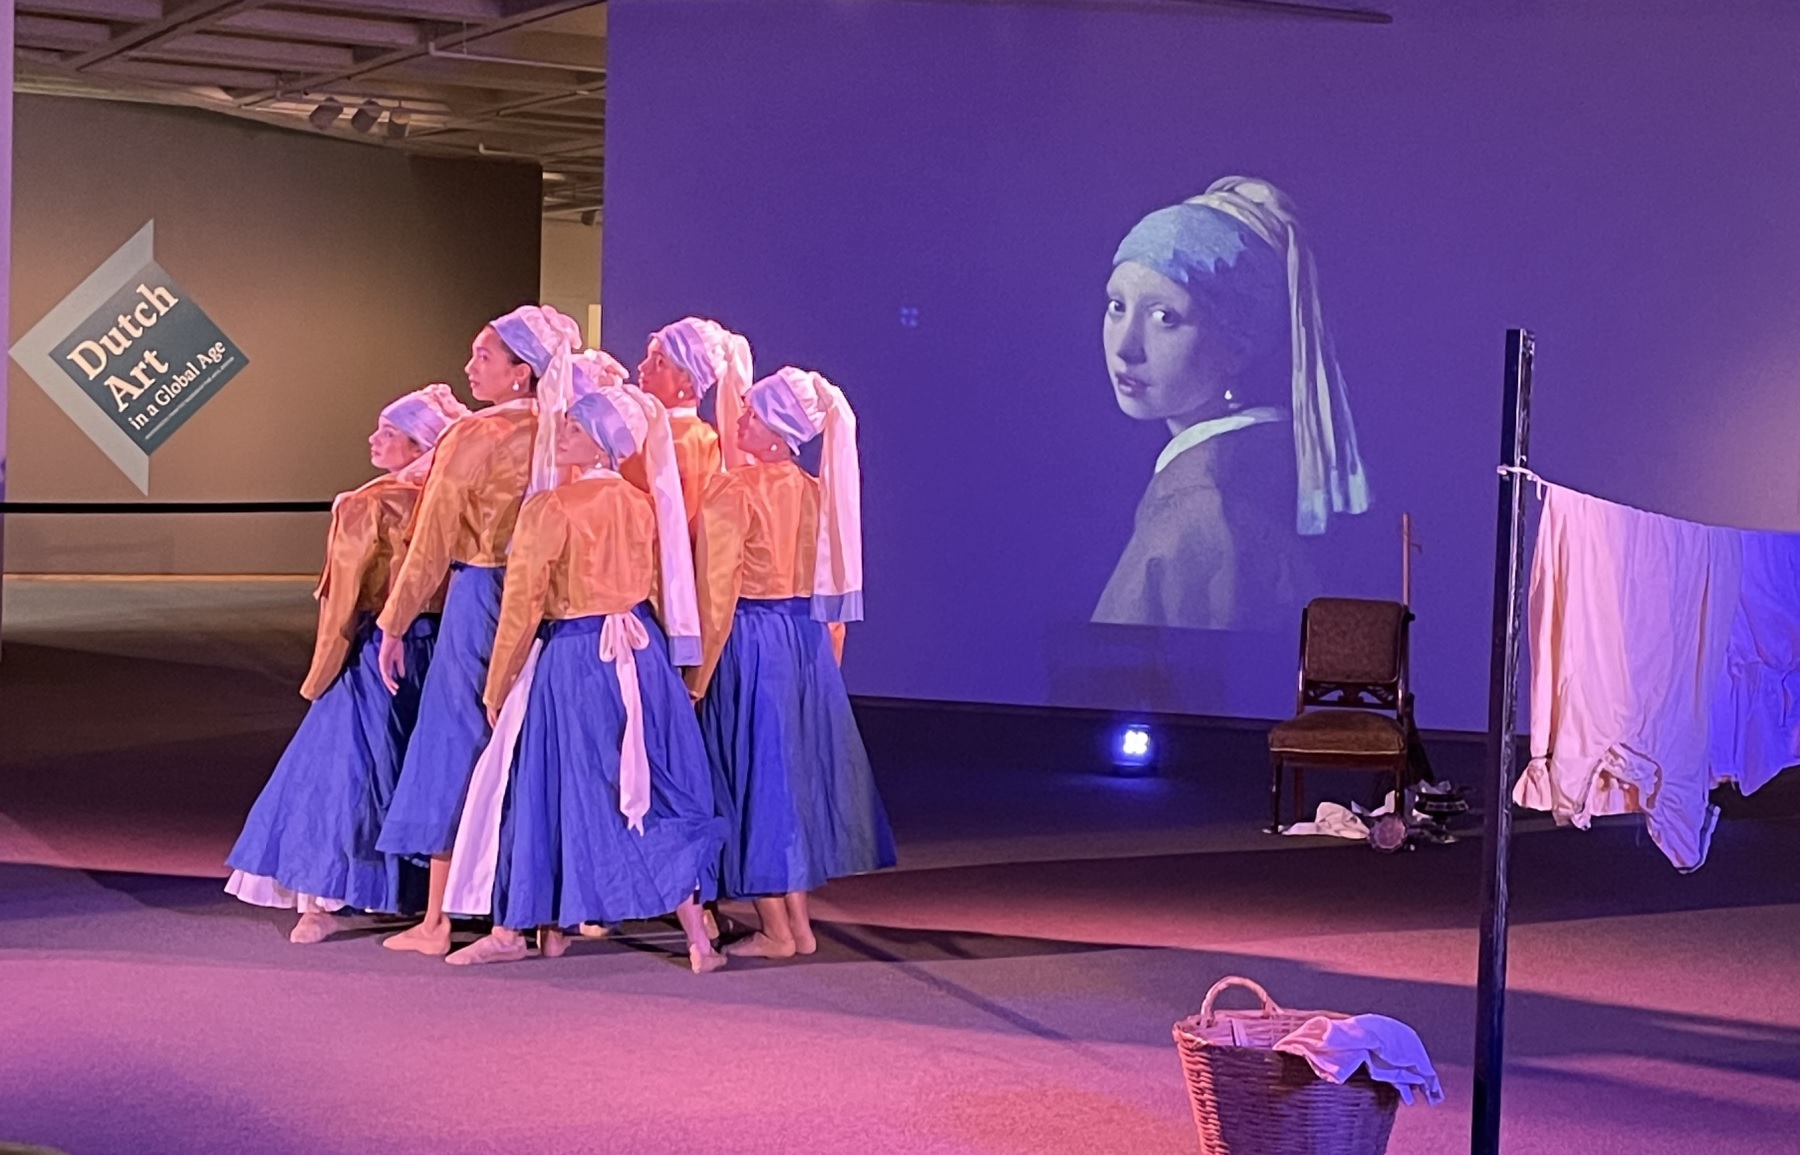 dancers at museum performing Girl with Pearl Earring